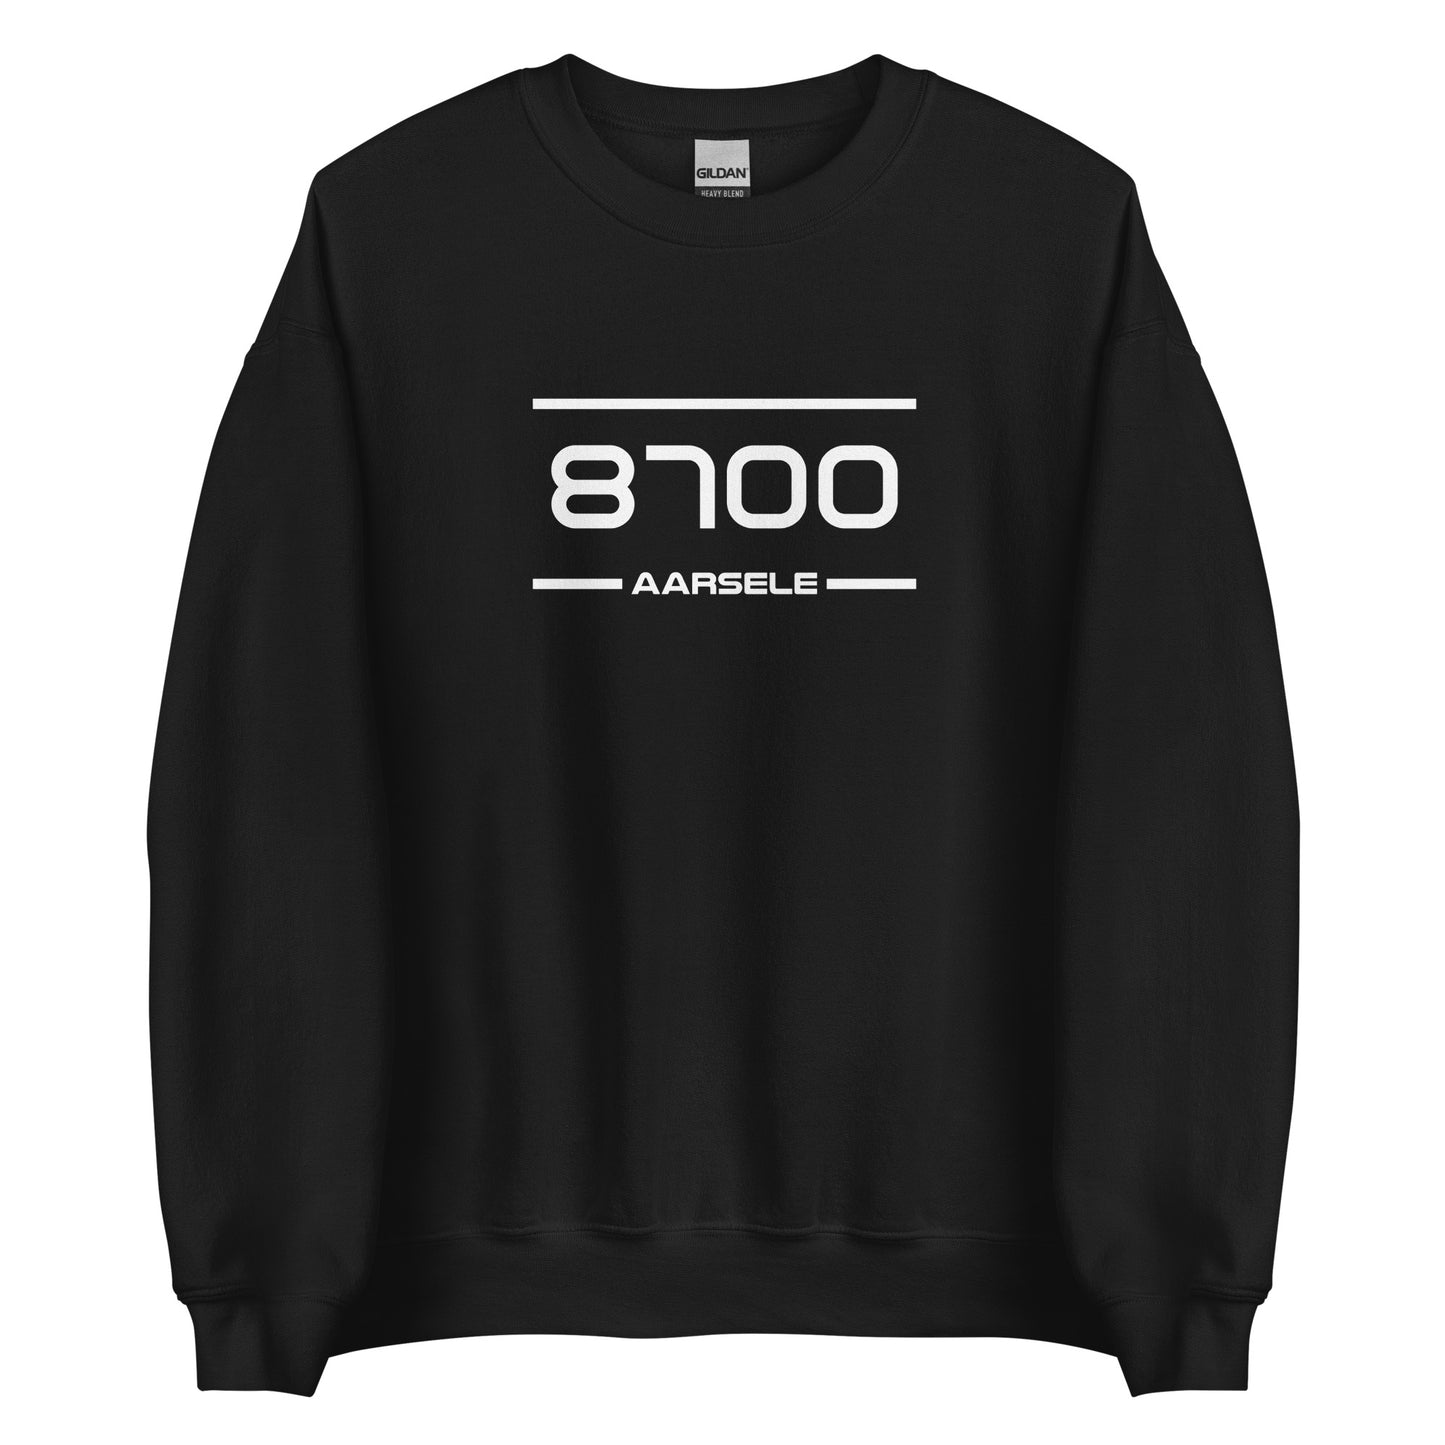 Sweater - 8700 - Aarsele (M/V)